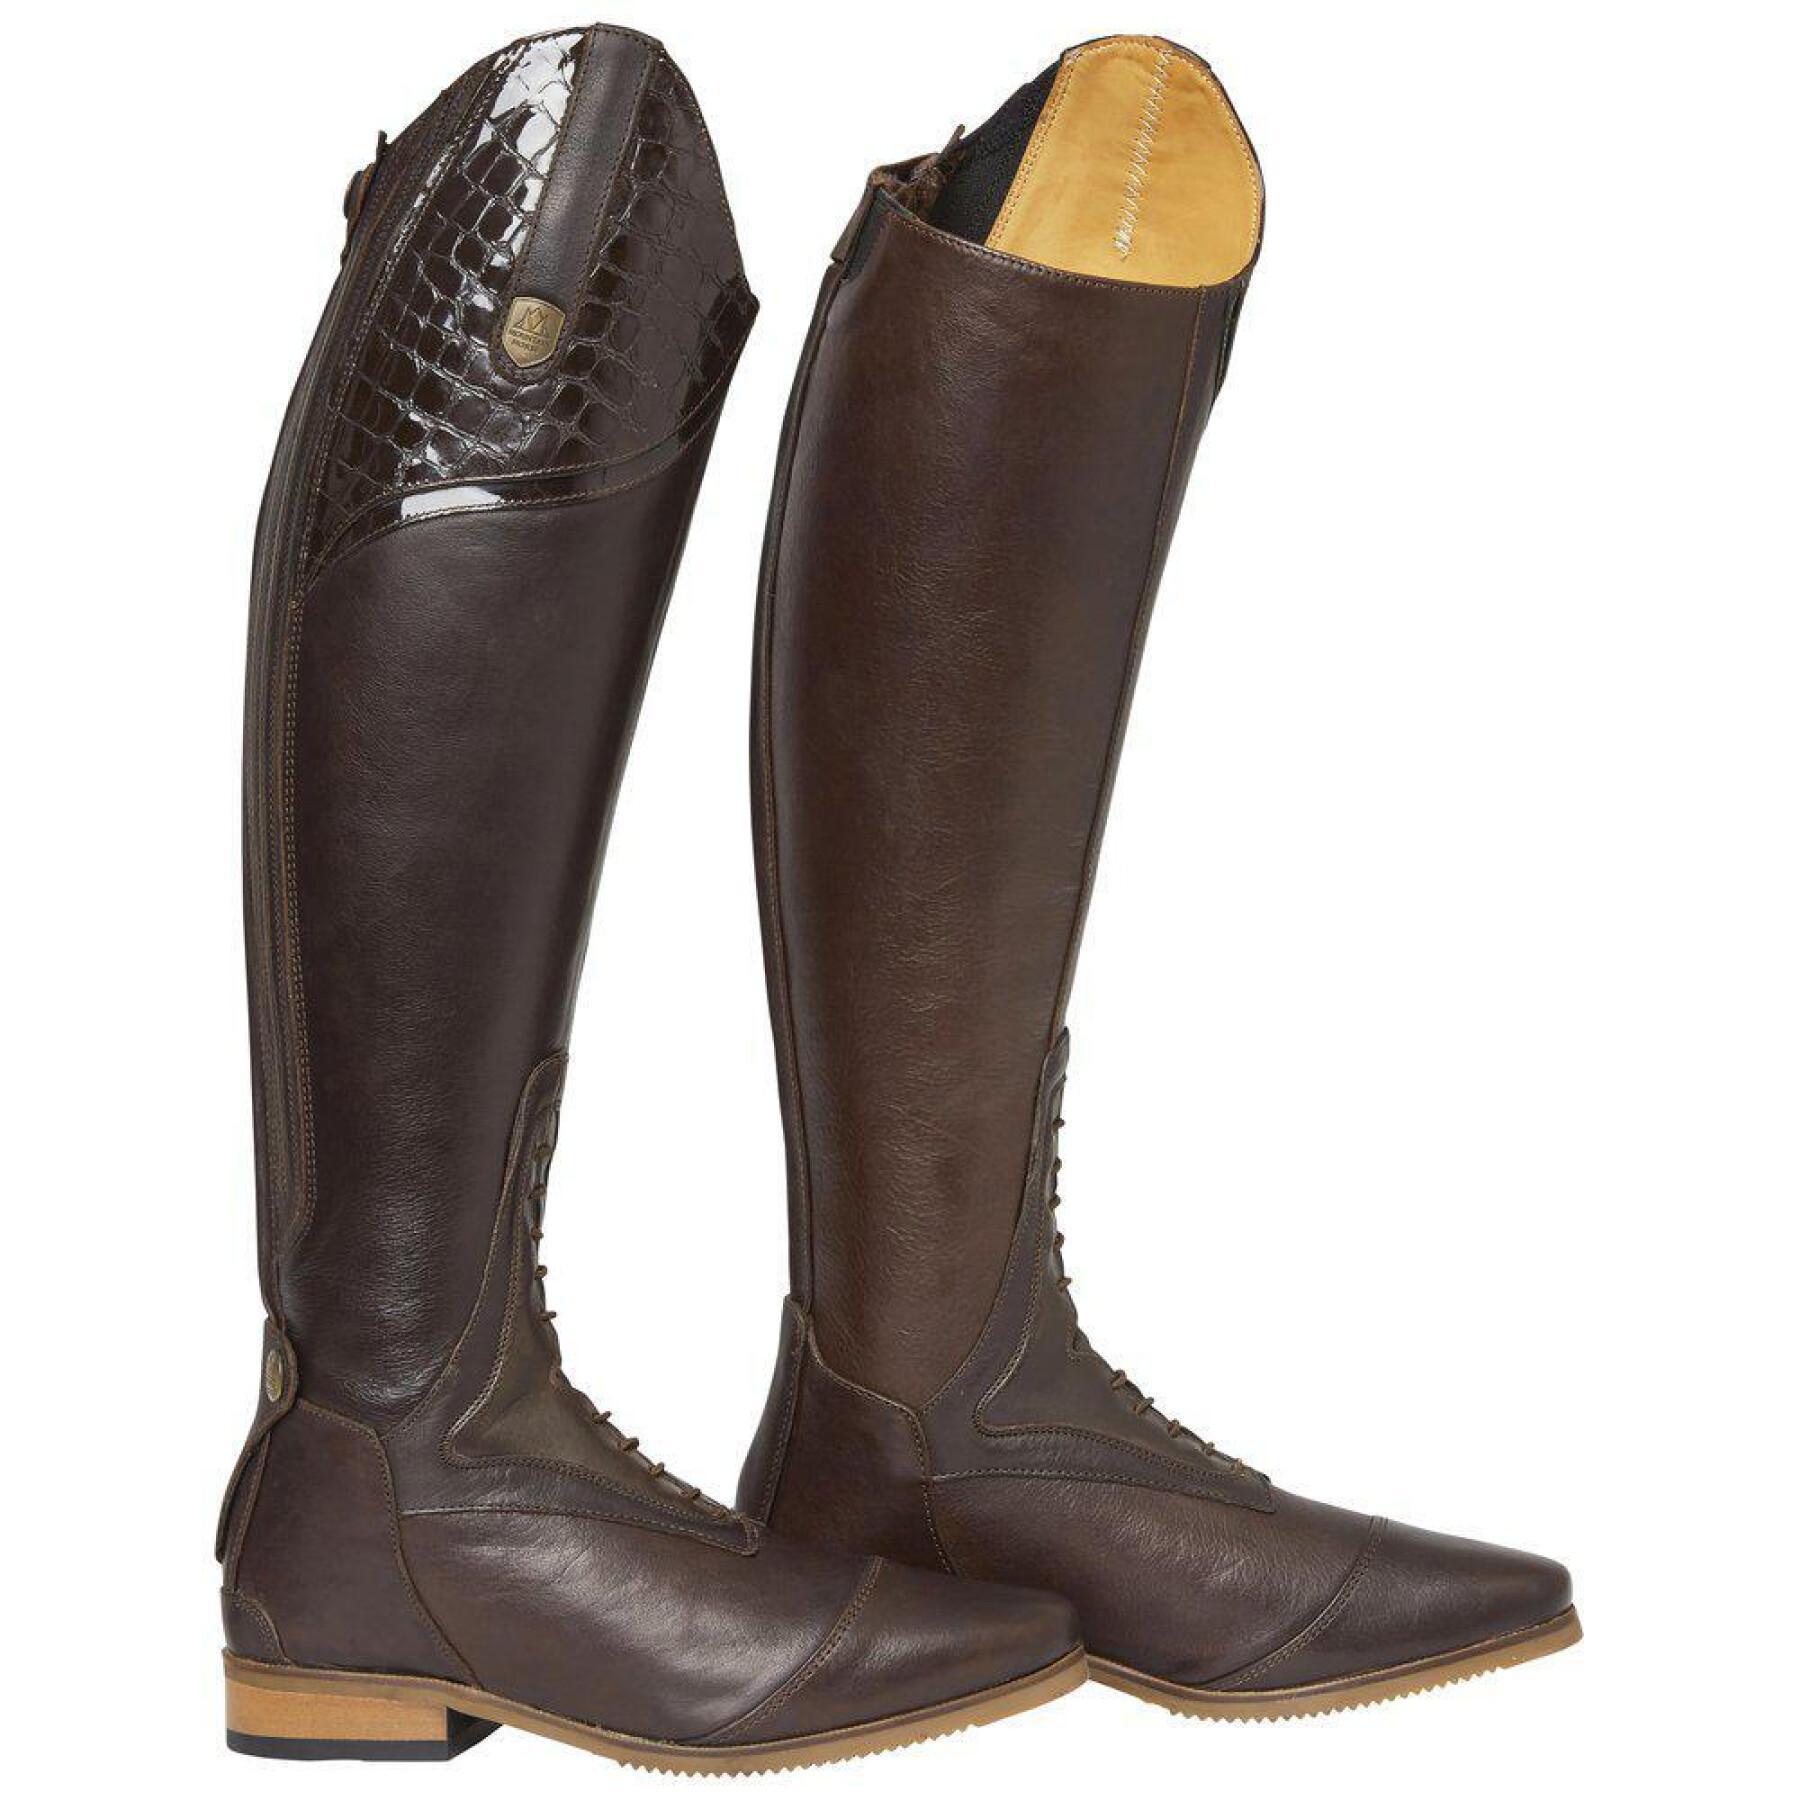 Women's leather riding boots Mountain Horse Sovereign Lux HR Regular Wide